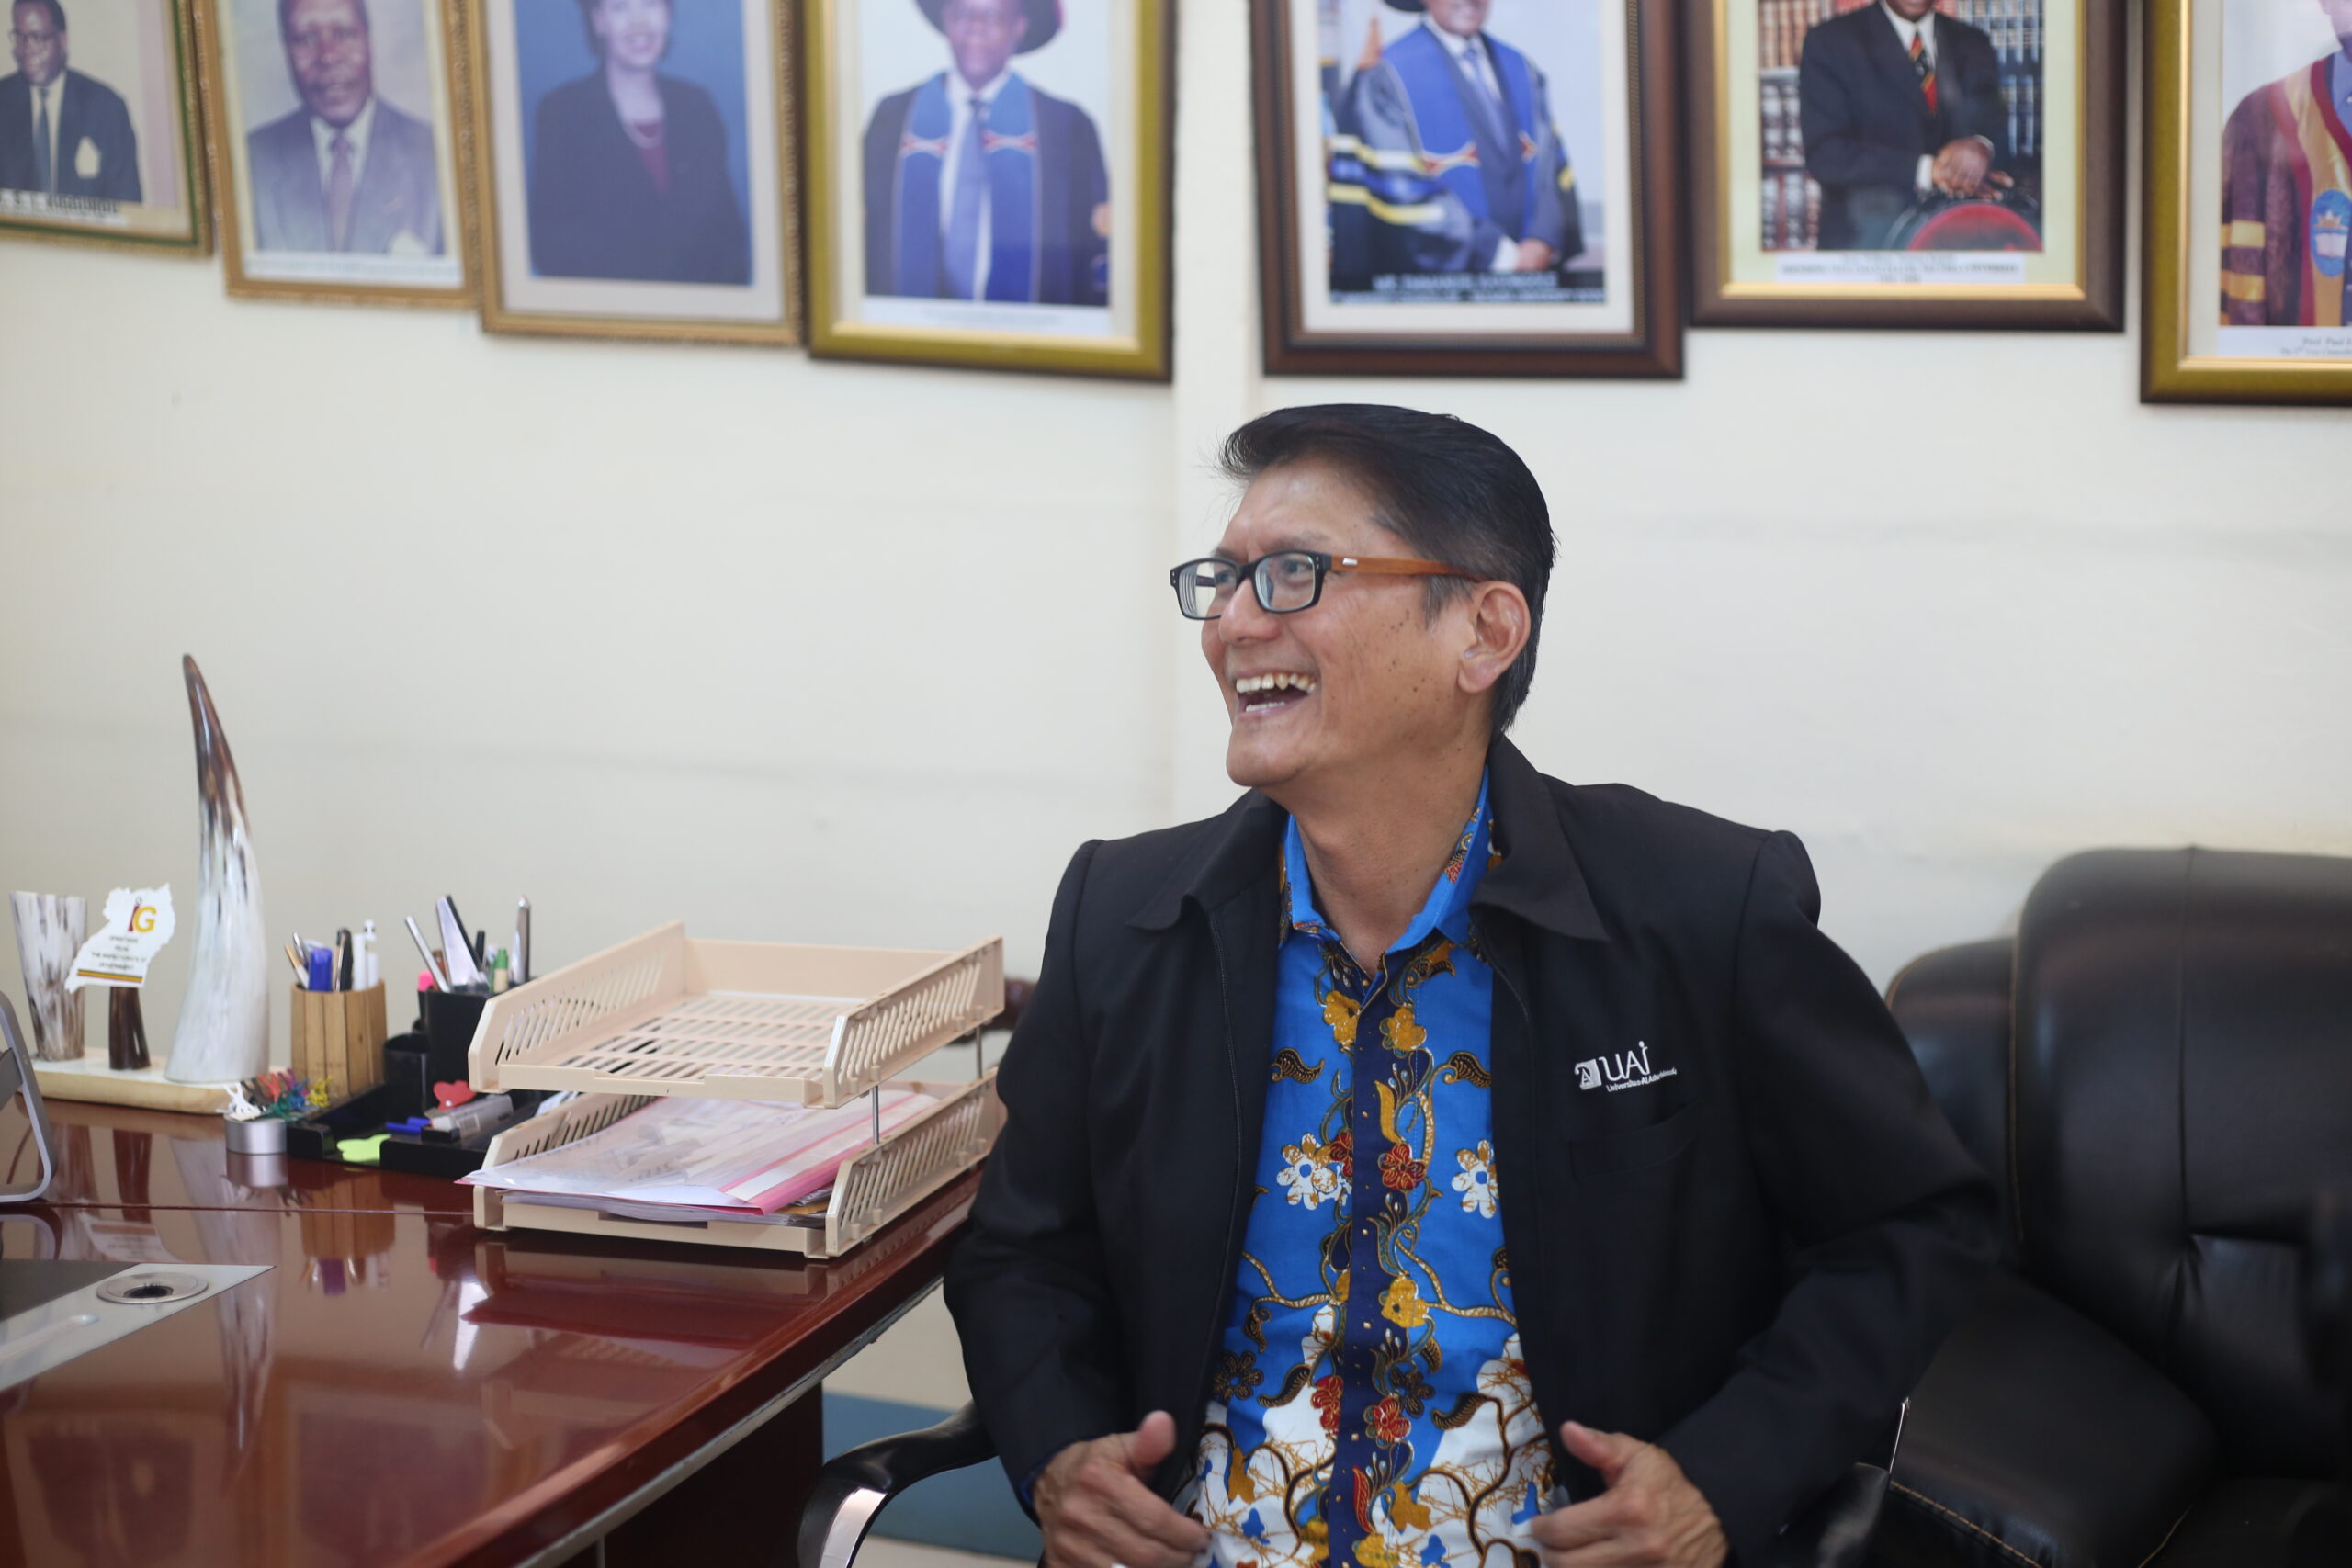 Dr. Hidayat Yorianta while at the Vice Chancellor's office yesterday.